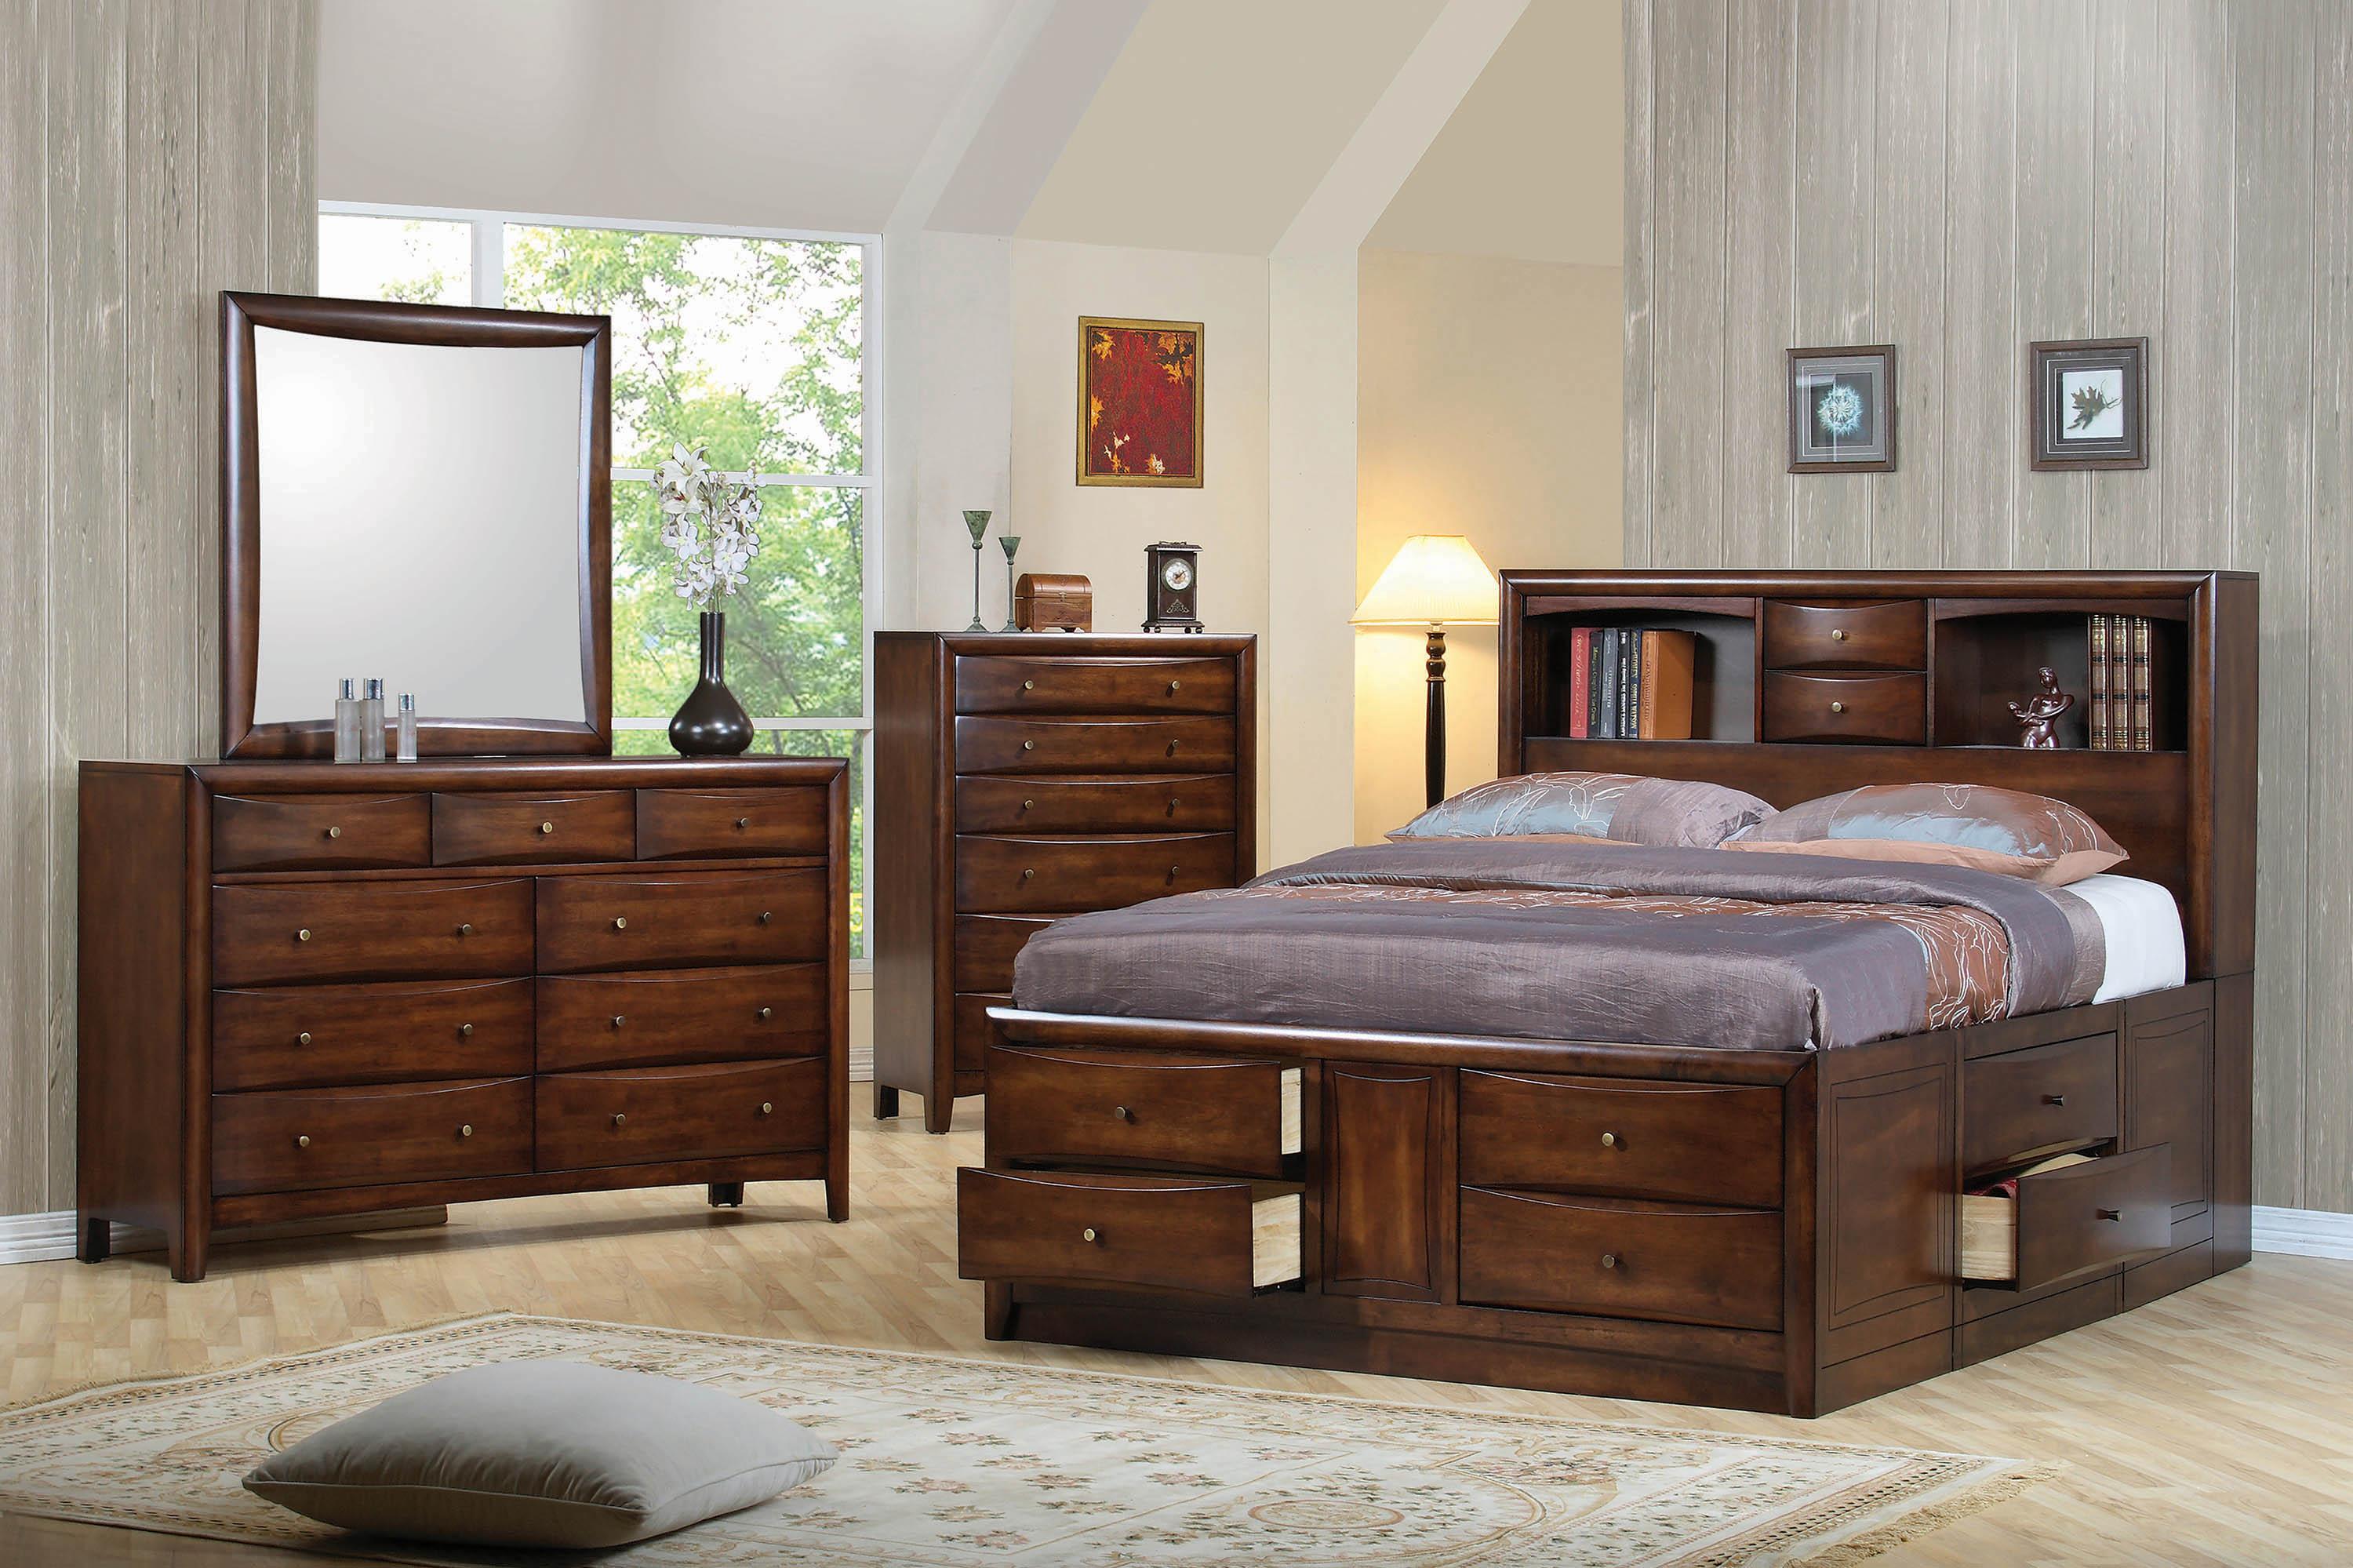 

    
Transitional Brown Wood C king bed Hillary by Coaster
